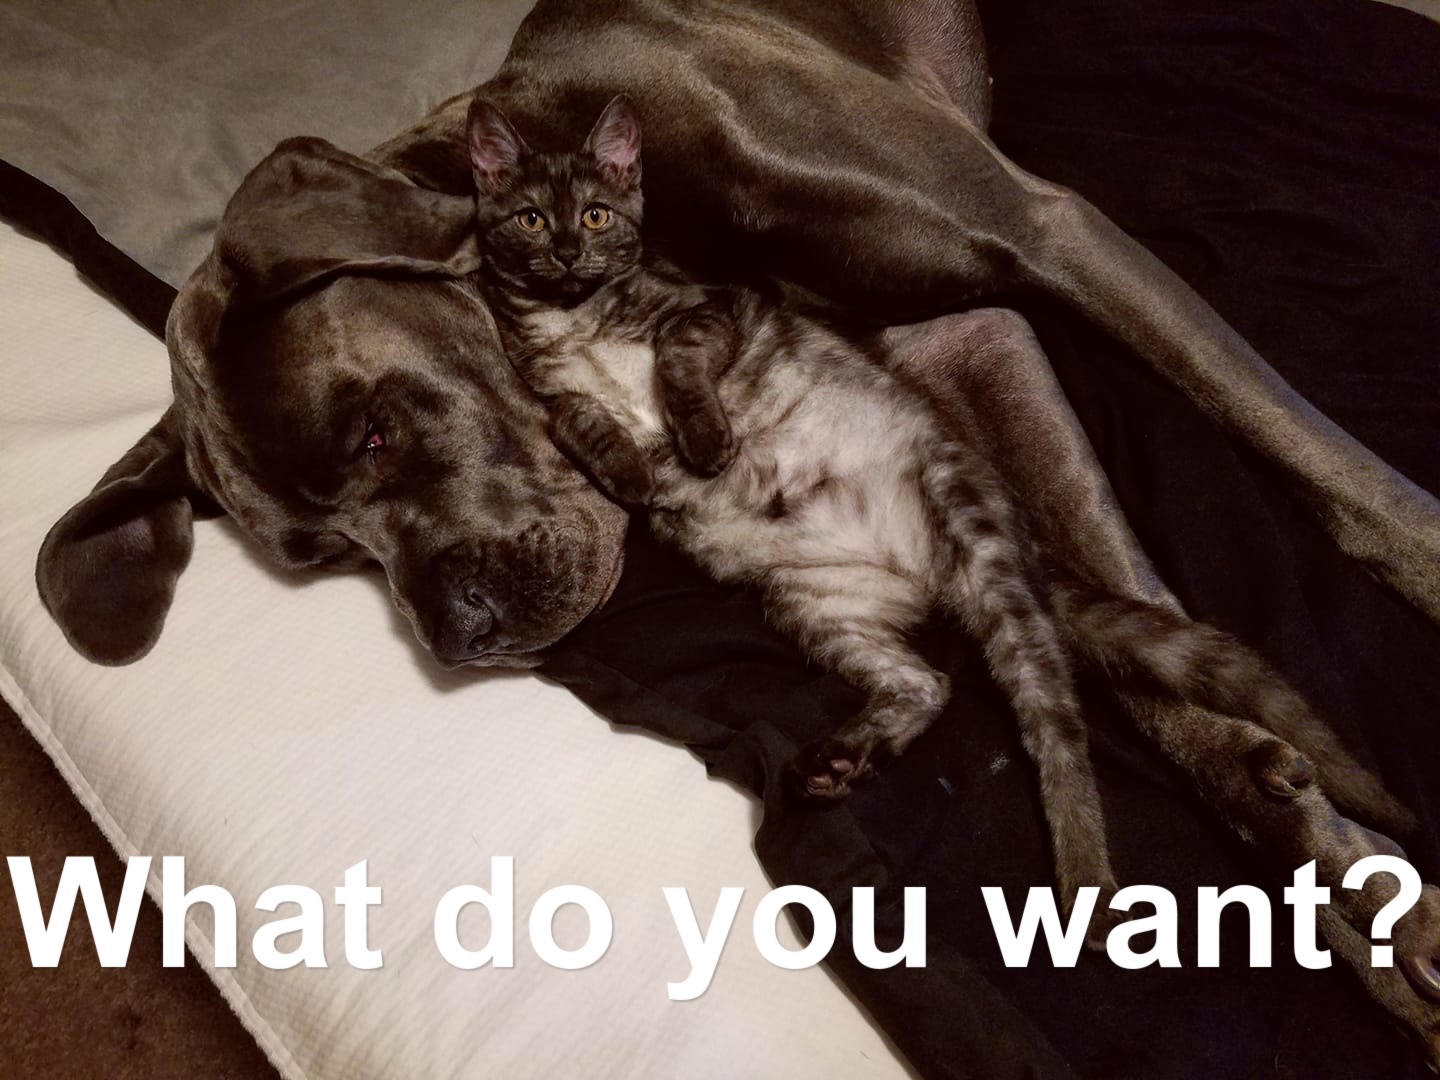 Great Dane sleeping in its bed while a cat is lying on his neck photo with text - What do you want?